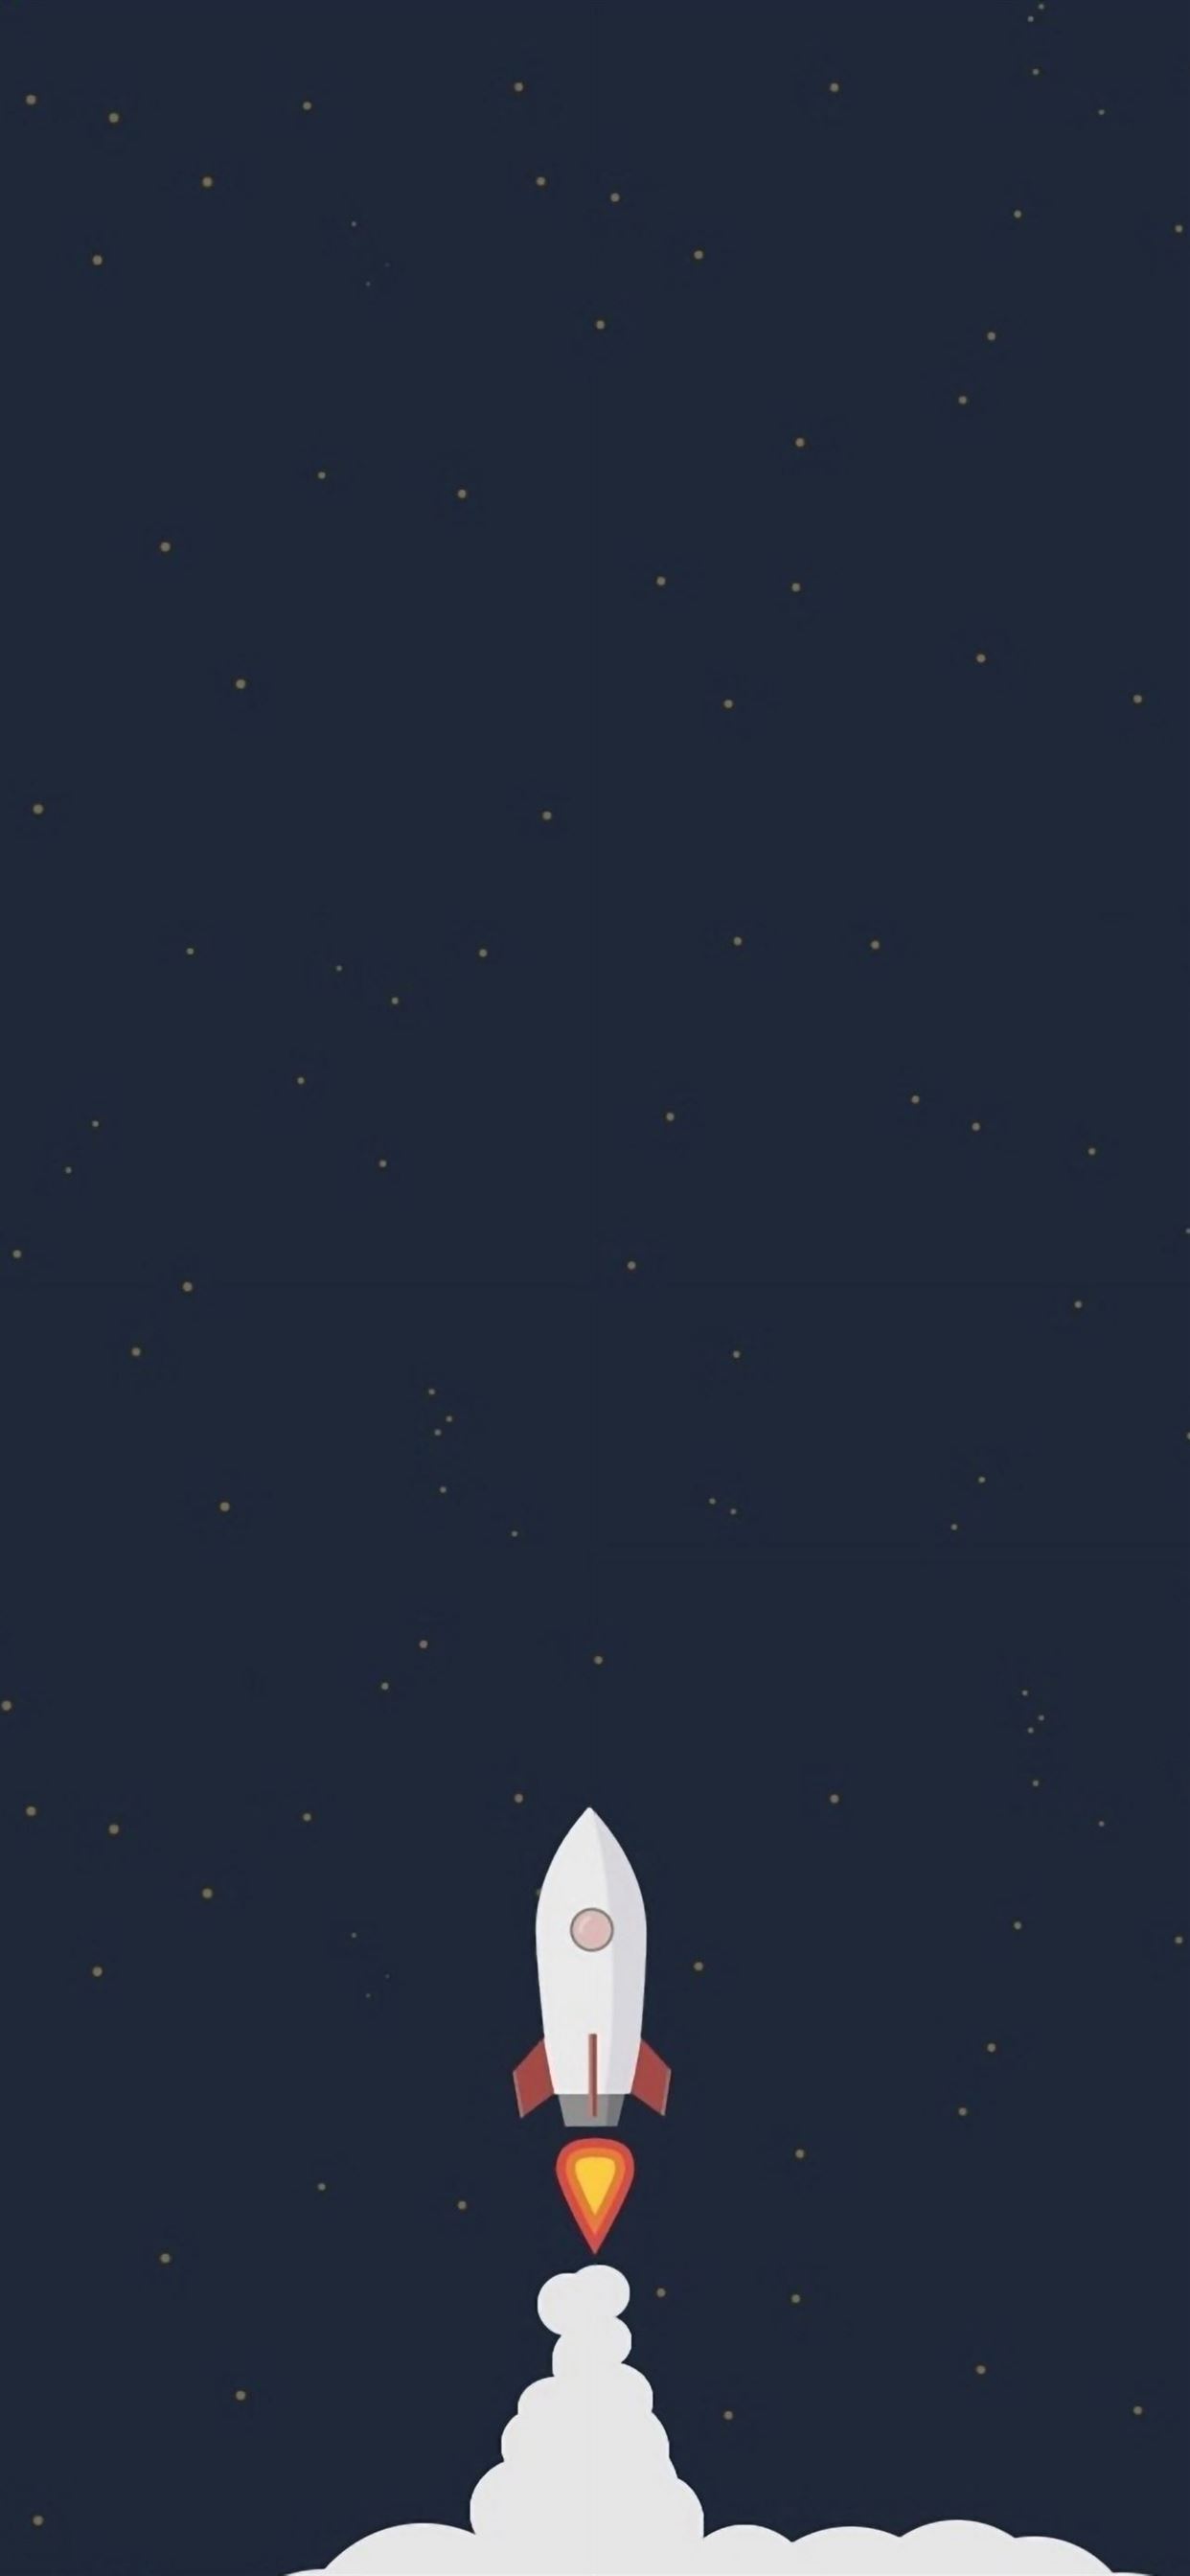 Rocket Liftoff Illustration iPhone Wallpapers Free Download